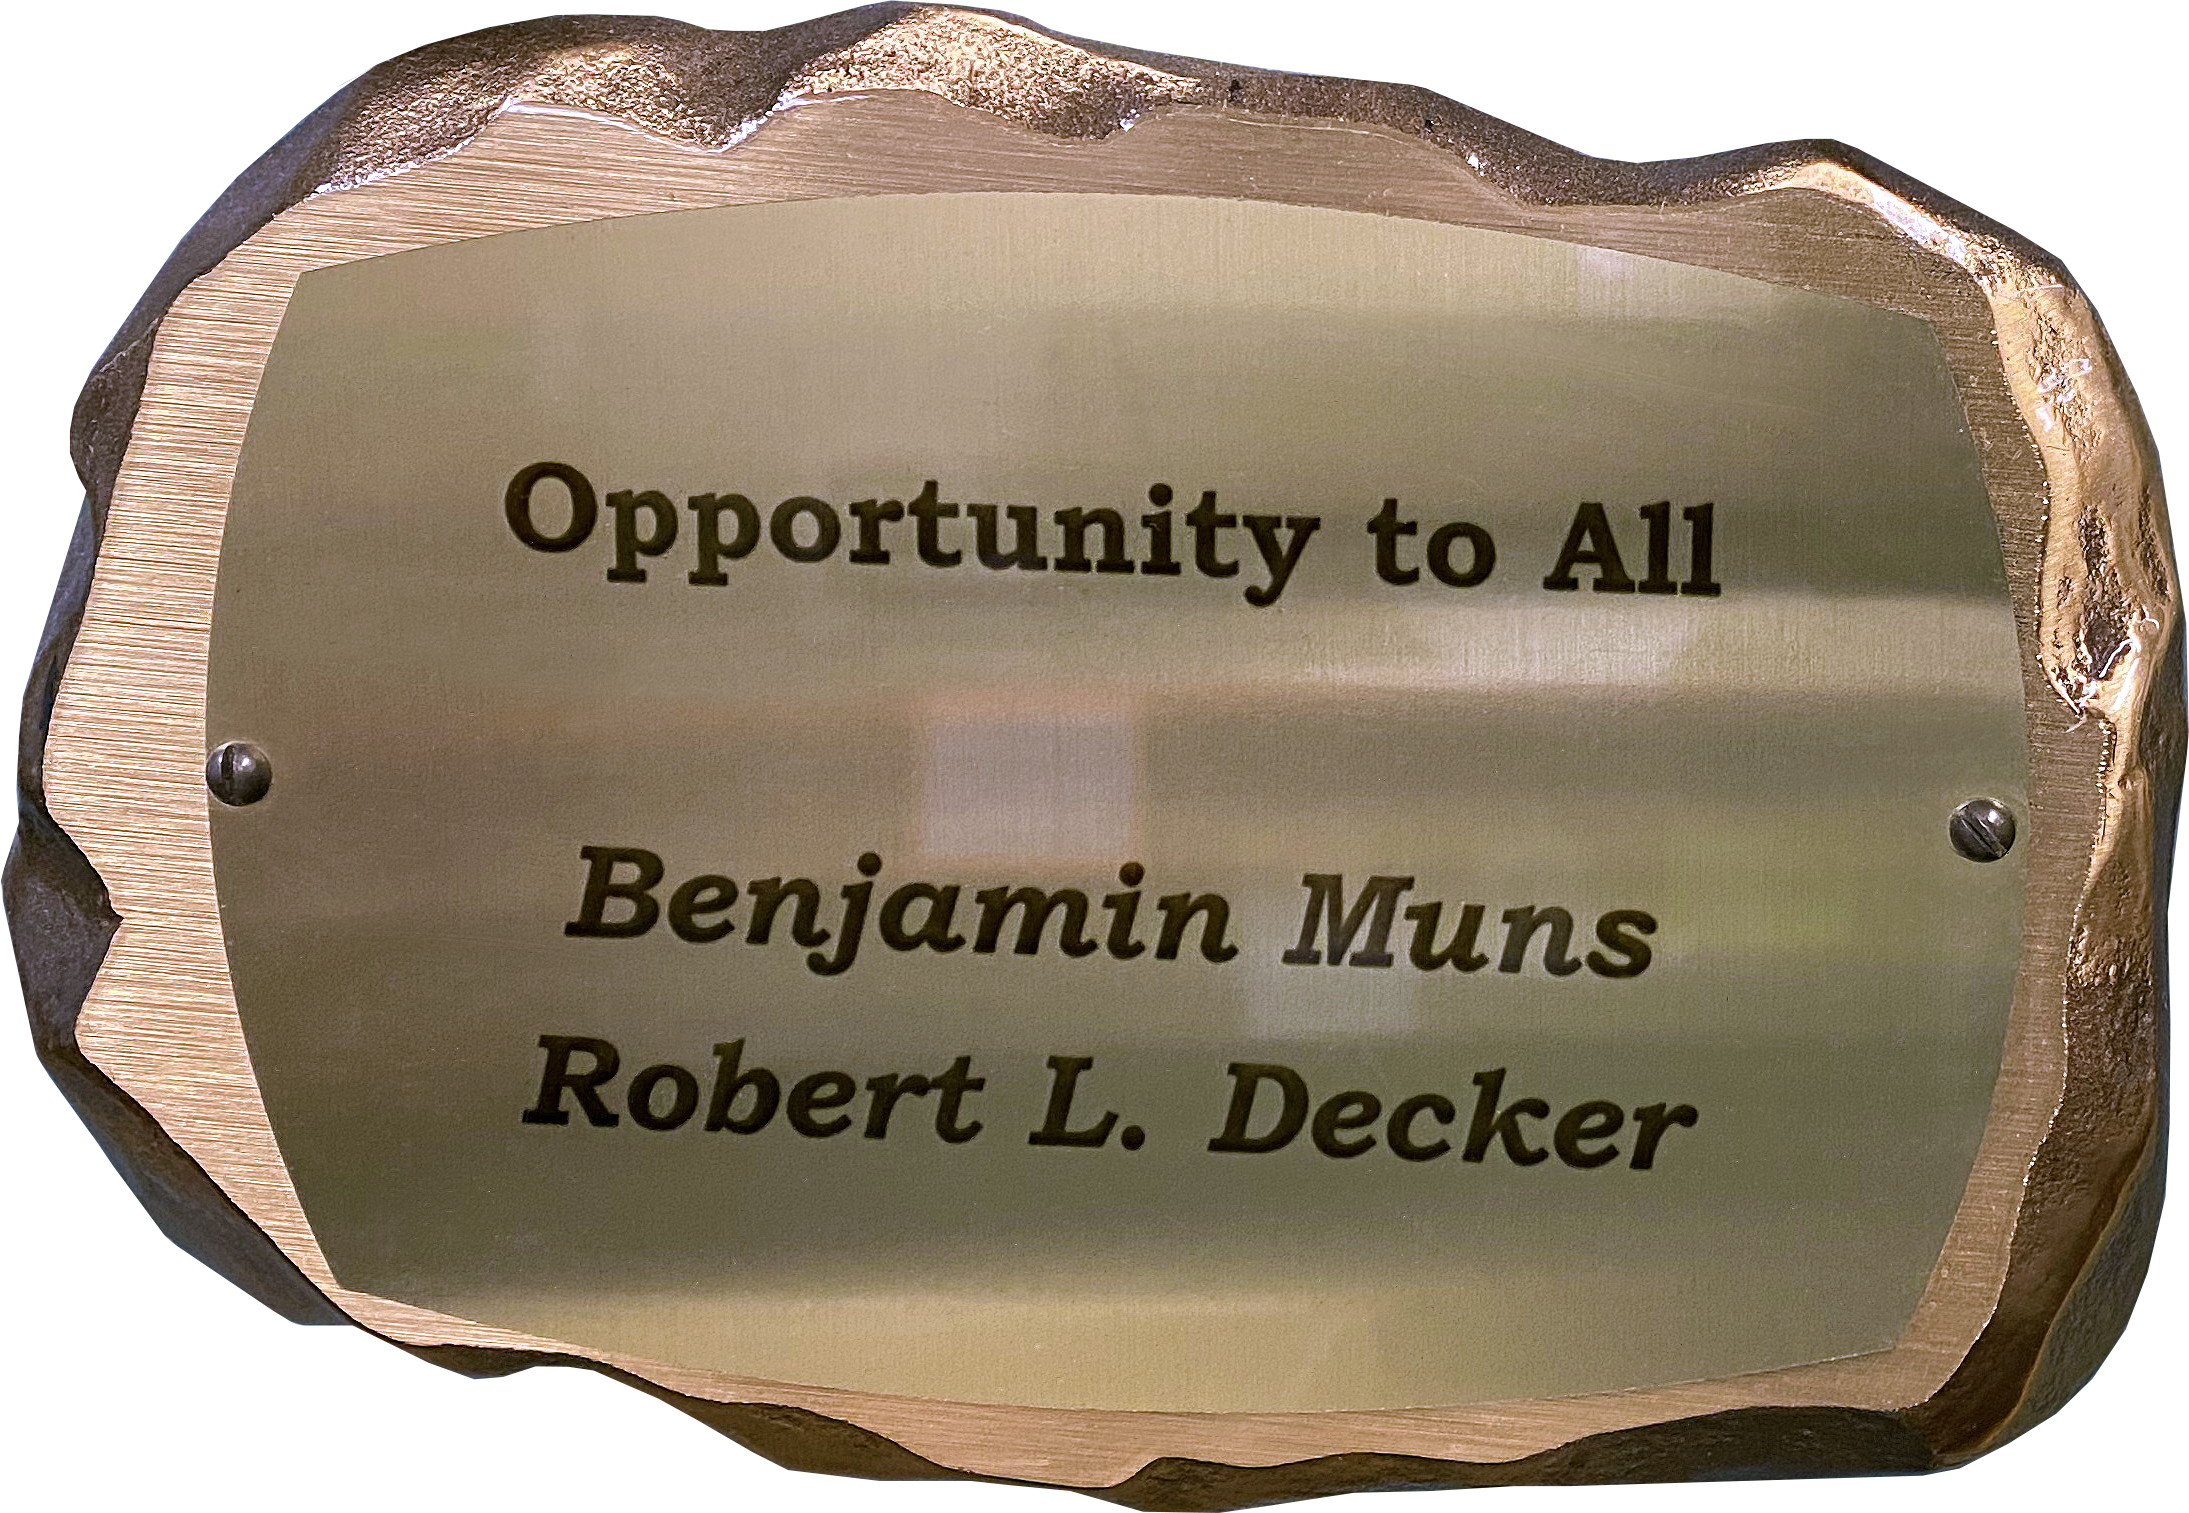 Inscribed bronze plaque in the shape of a rock with text on it reading: Opportunity to All. Benjamin Muns. Robert L. Decker